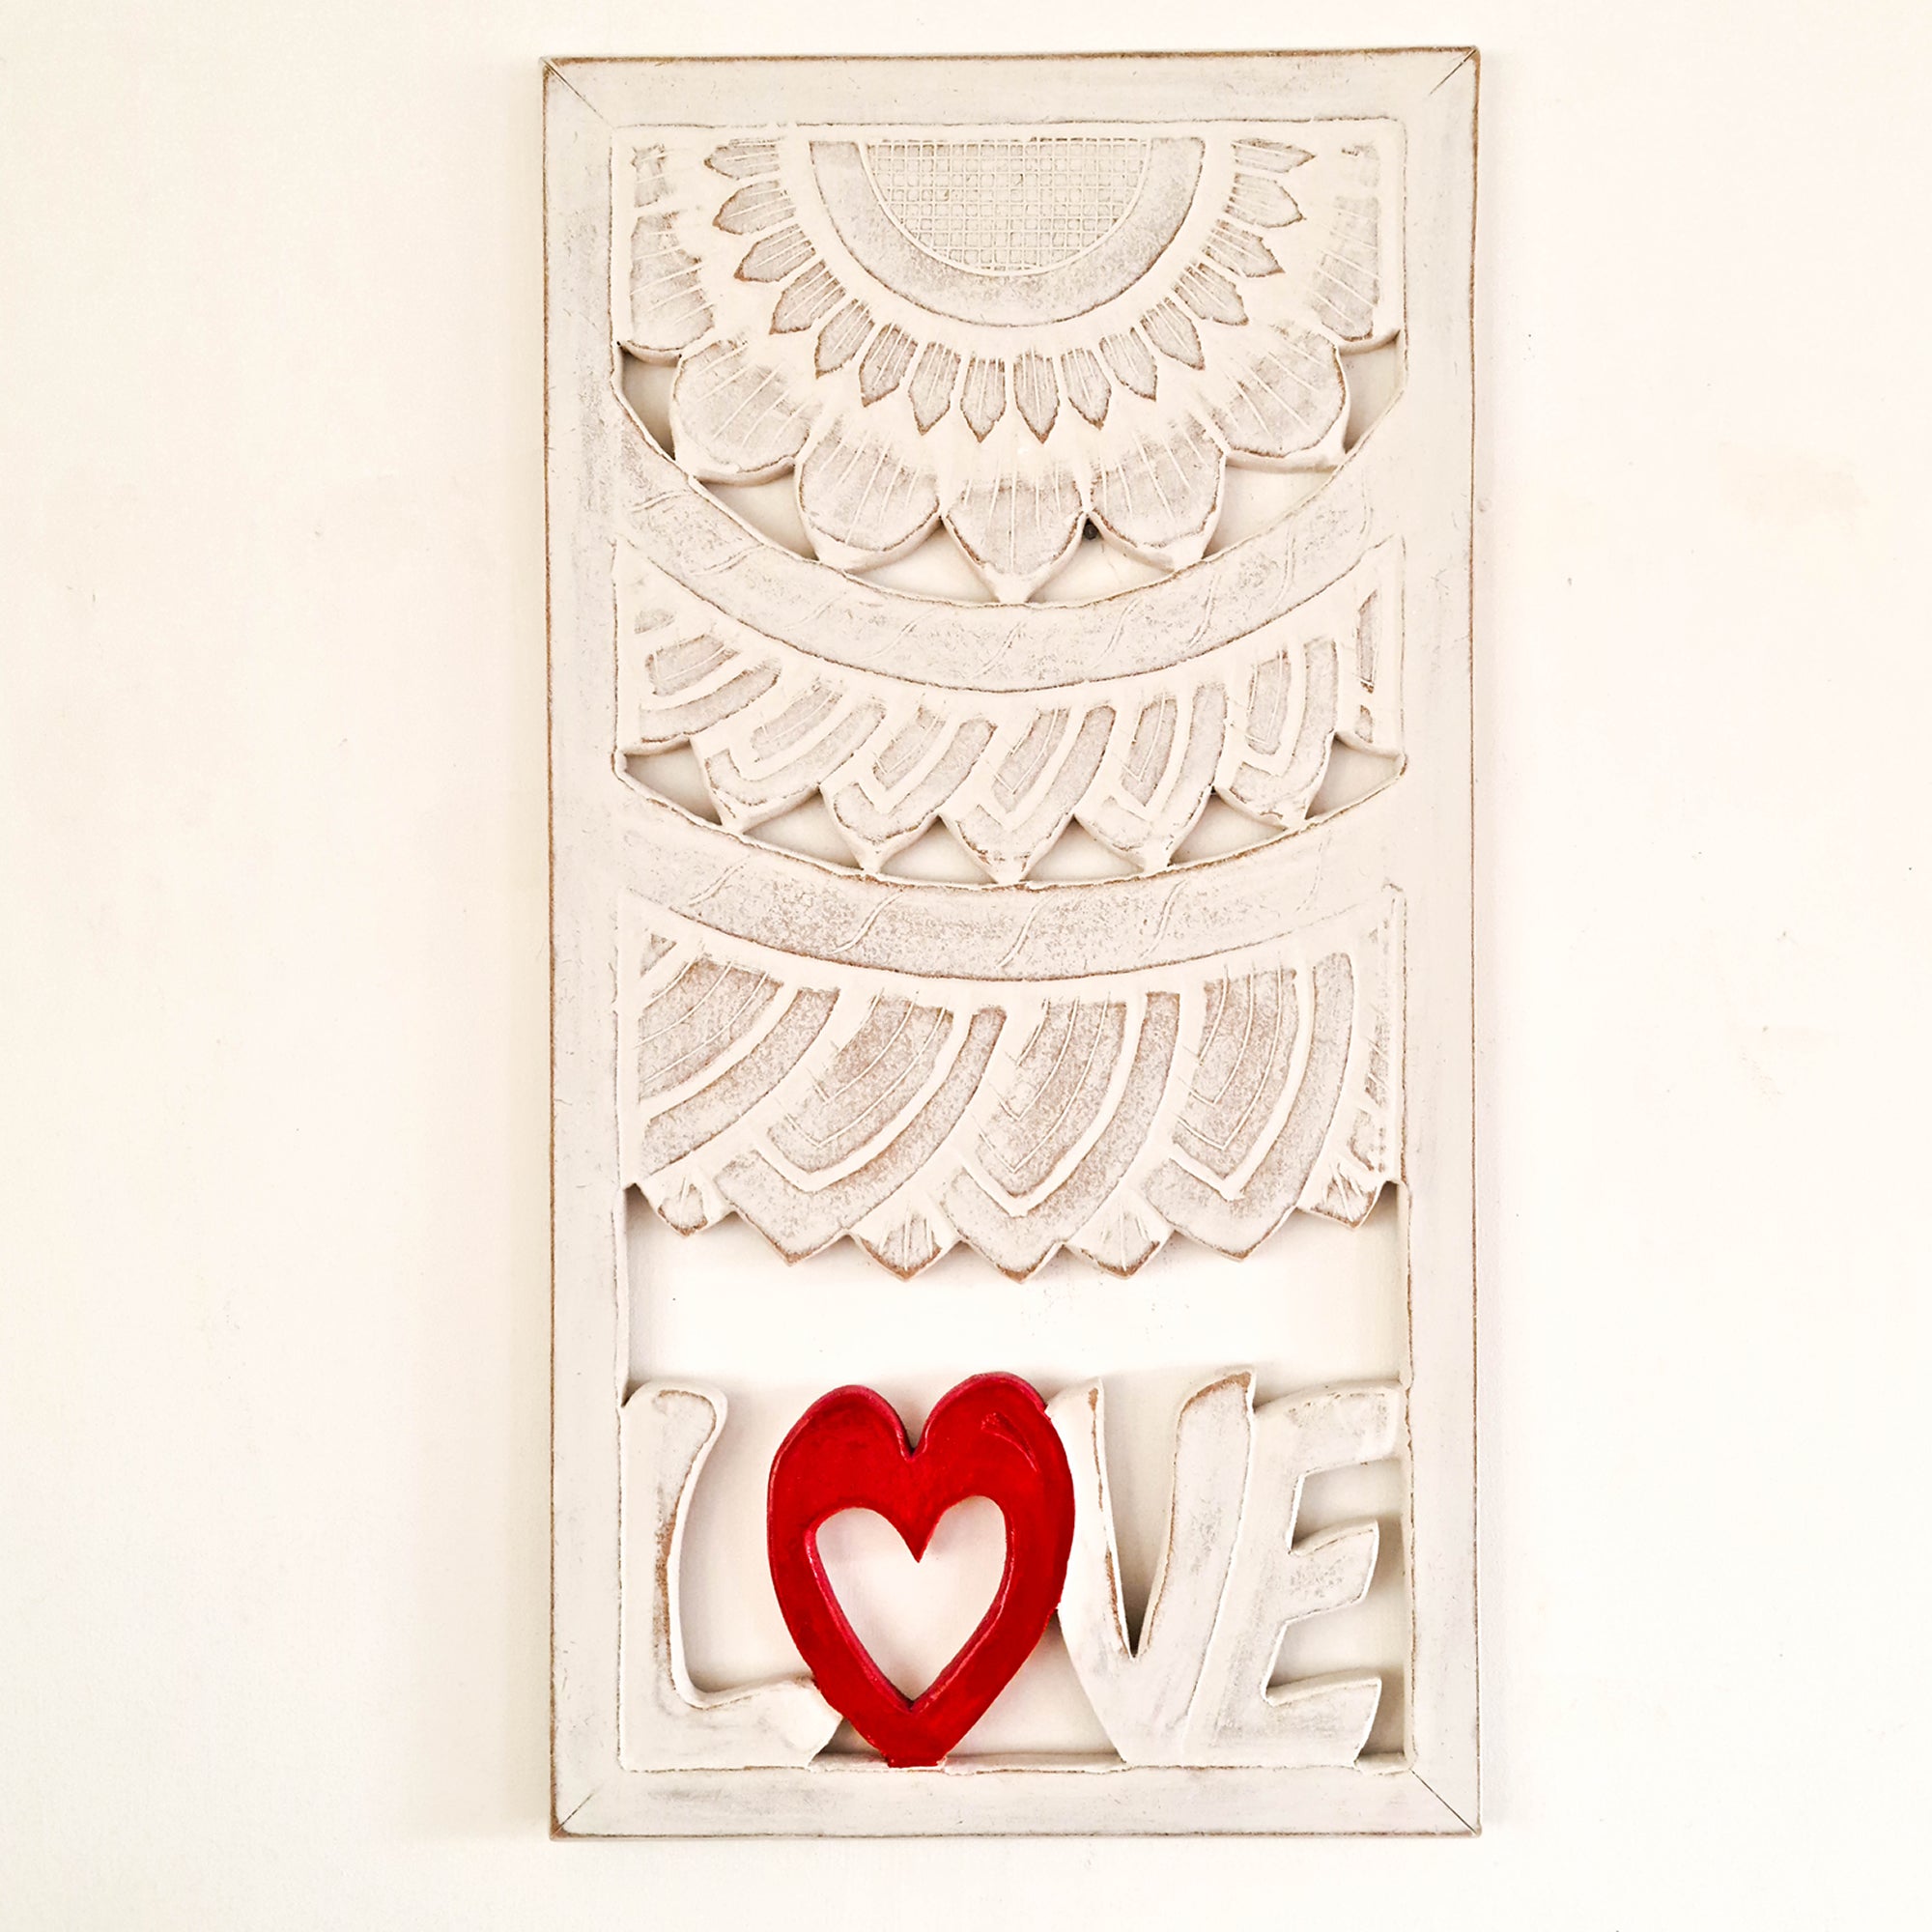 Bohemian Mandala Valentine Love hand-carved wooden wall art. An exclusive design to compliment any room. Stunning mandala with calligraphy Love. A perfect gift for a loved one